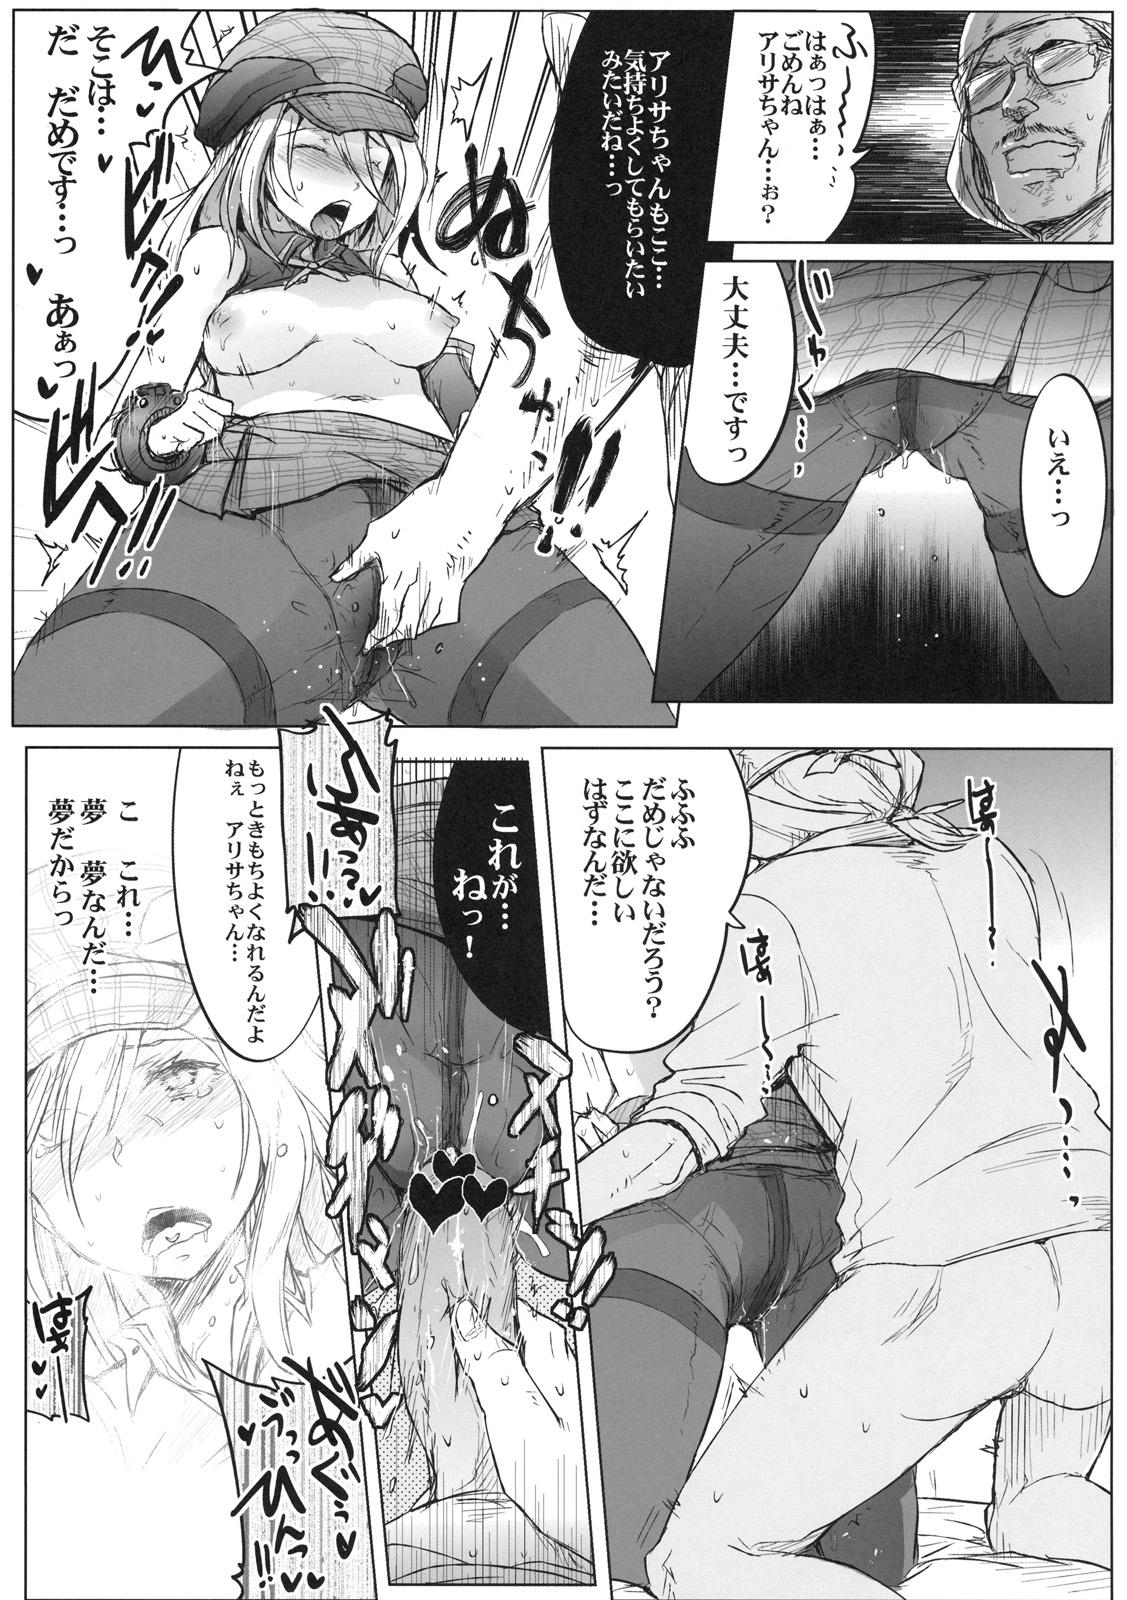 Groupfuck GE Girls - God eater Classic - Page 12